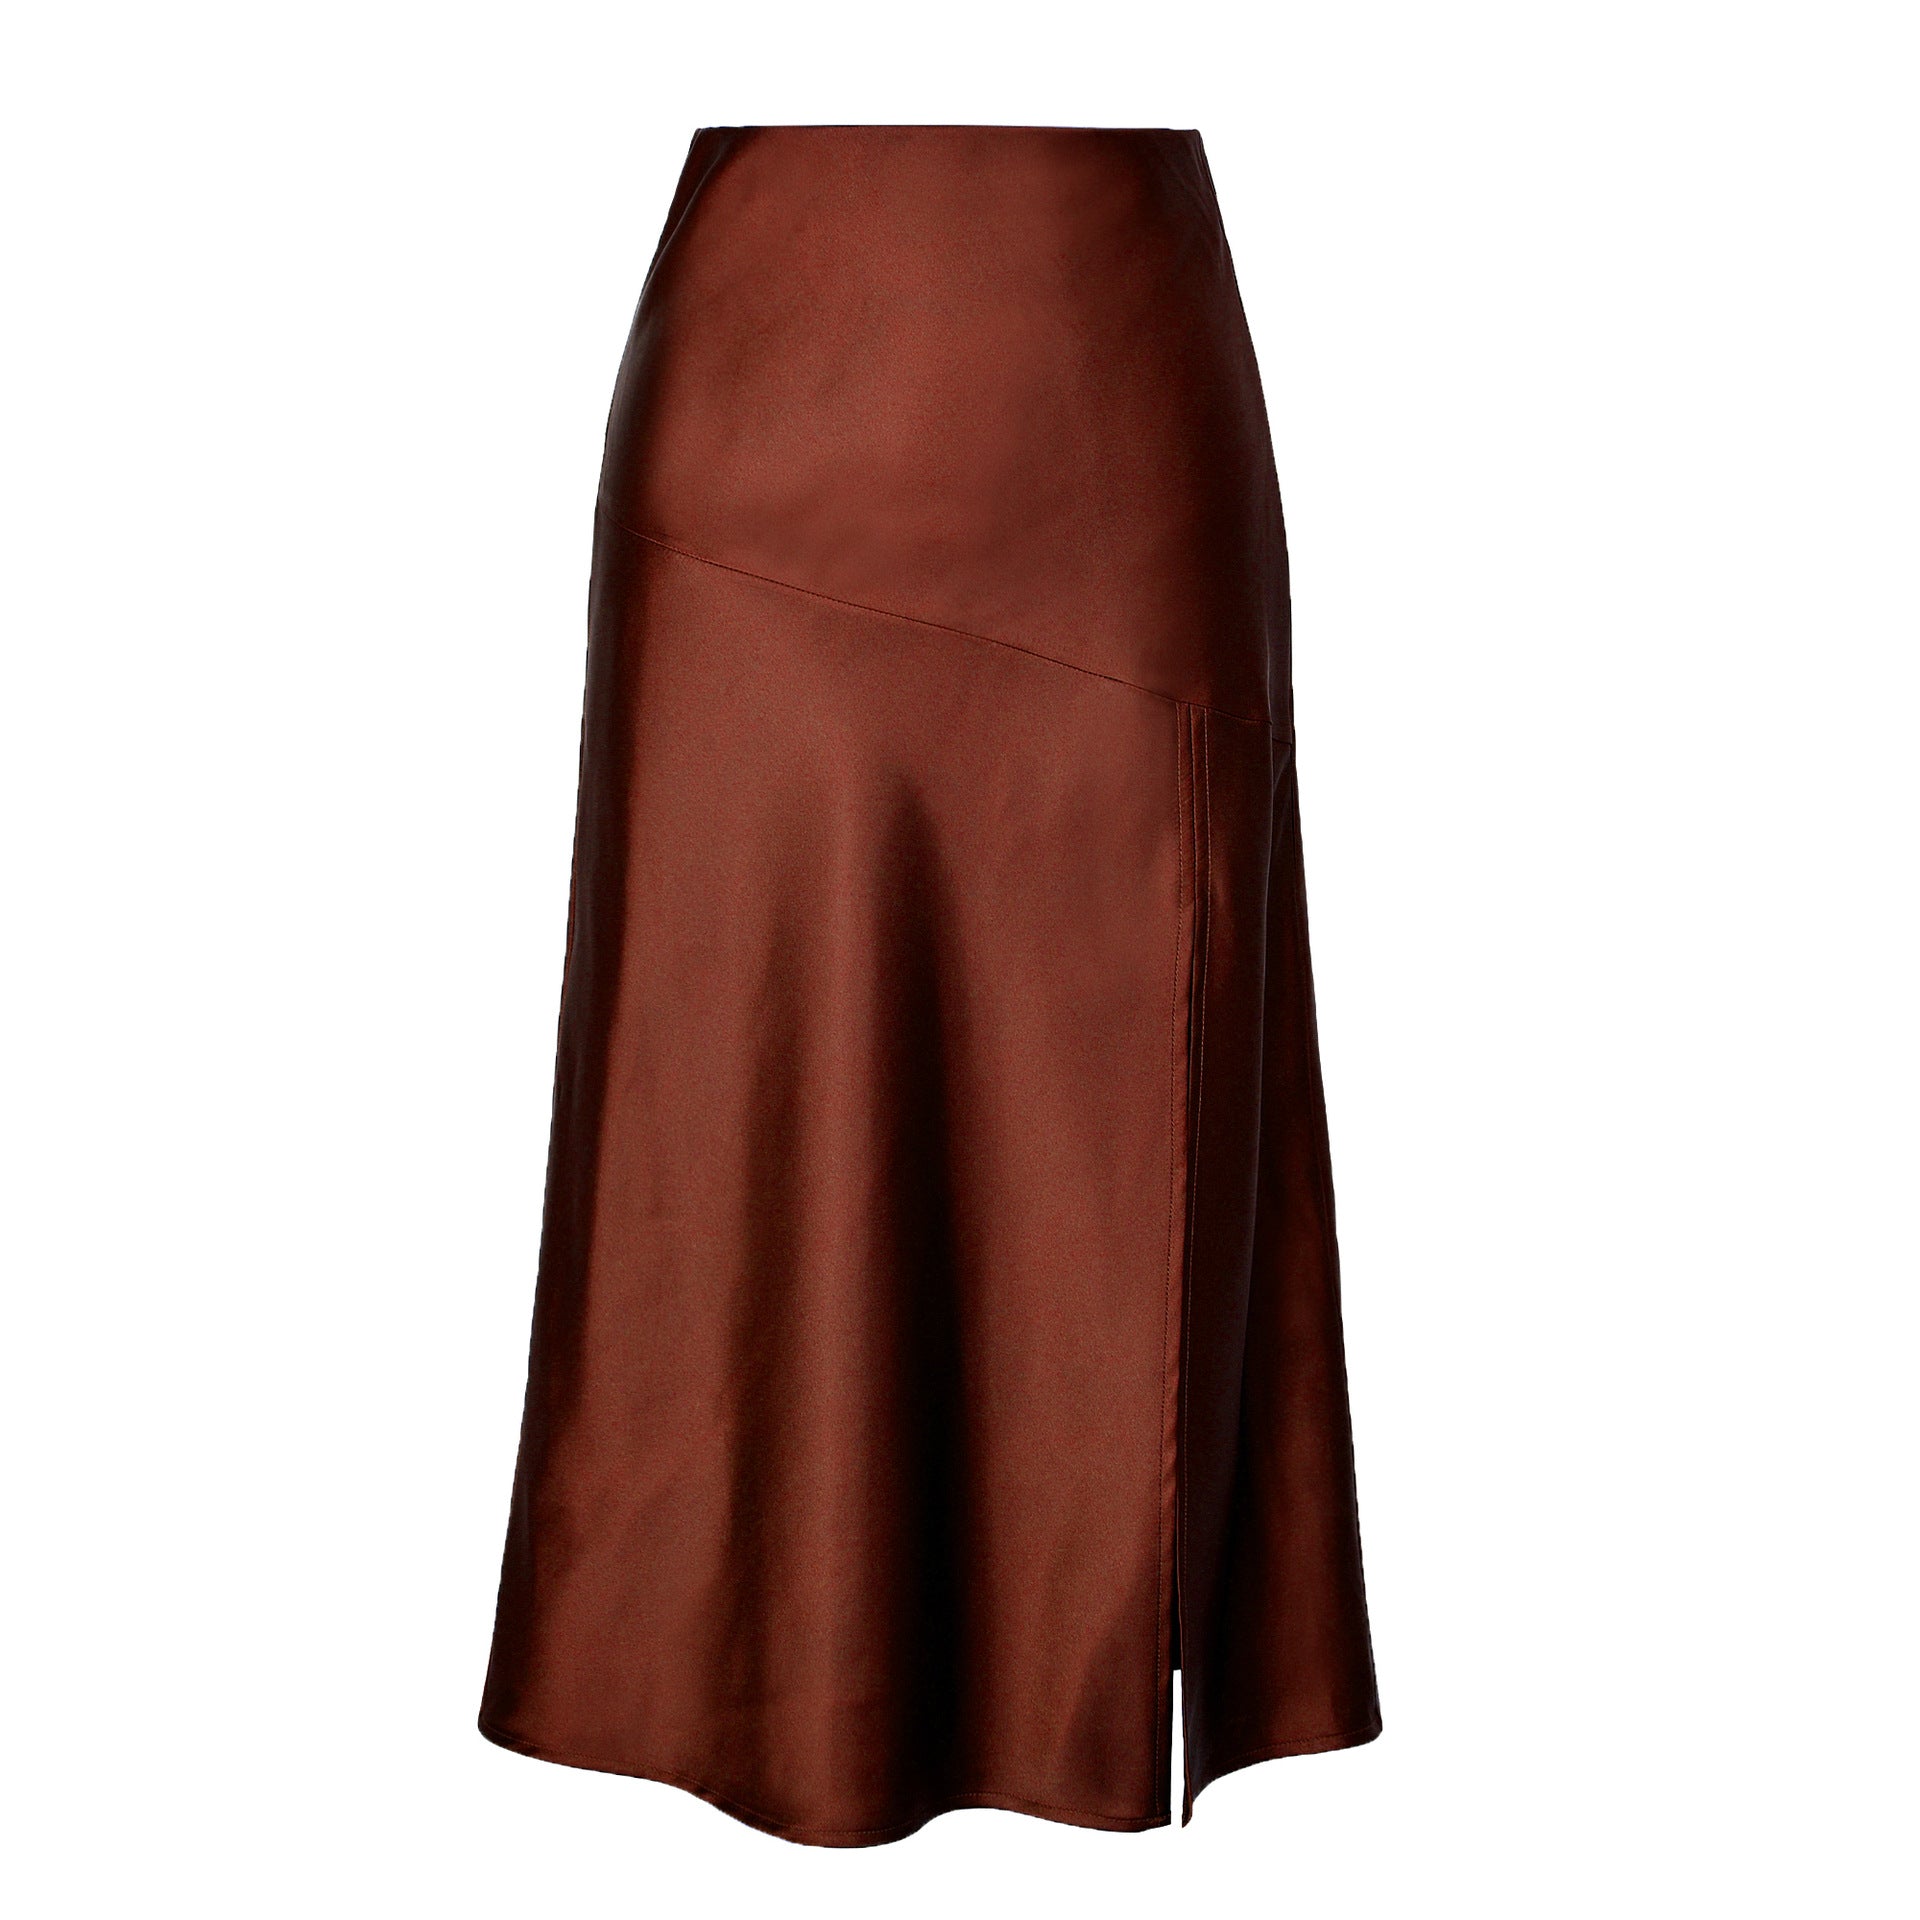 Women's Glossy Satin High-end Silky Pure Color Skirts